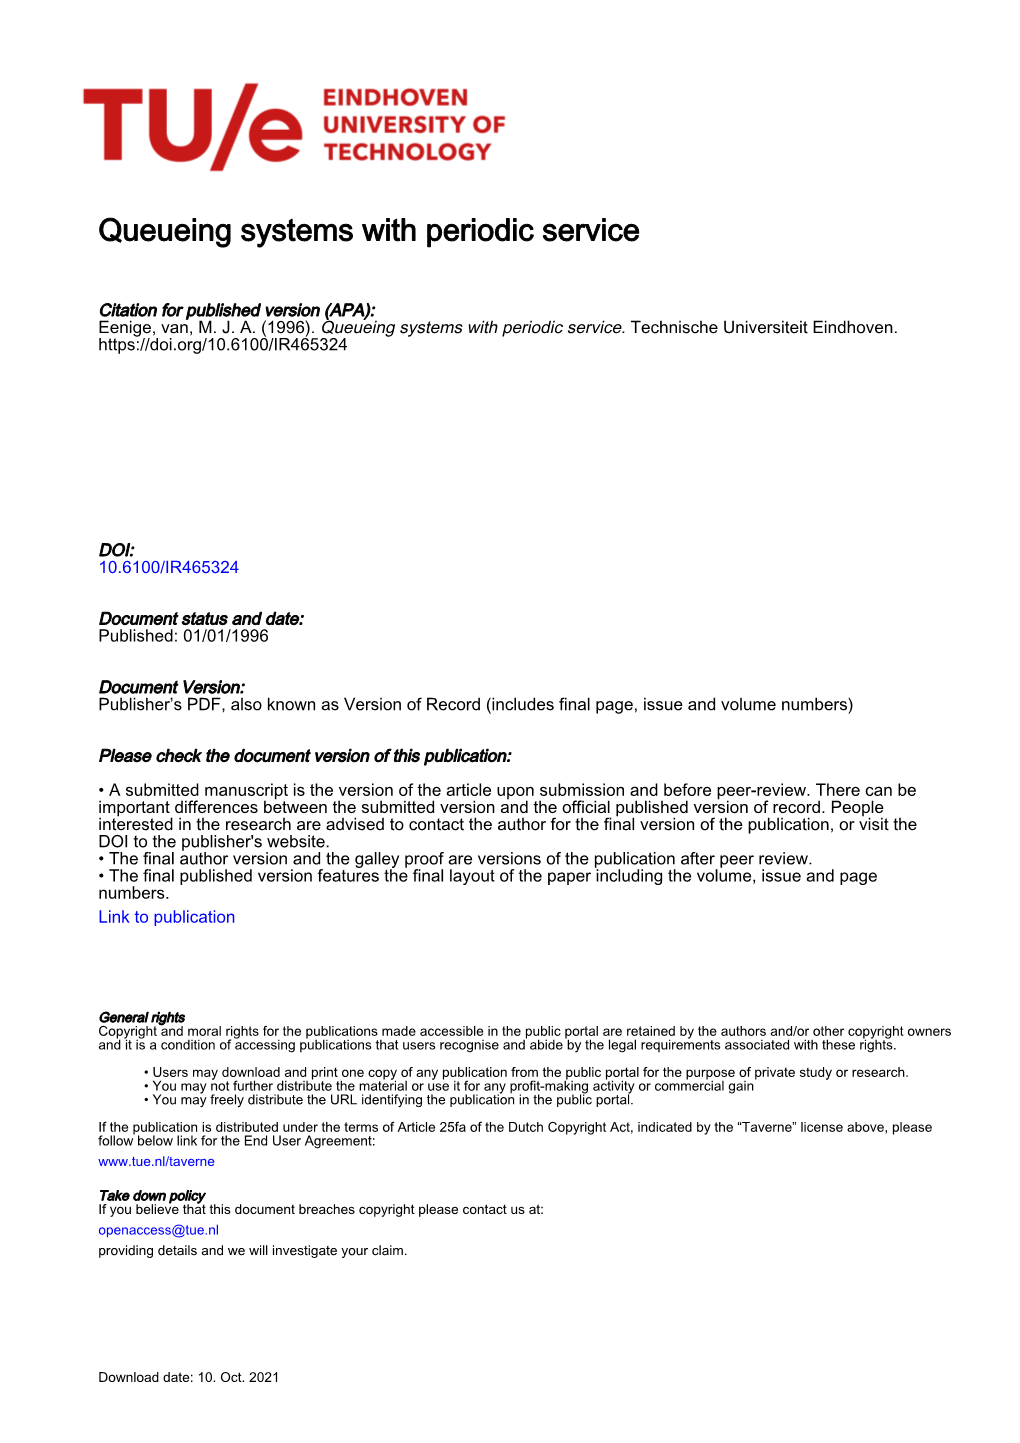 Queueing Systems with Periodic Service